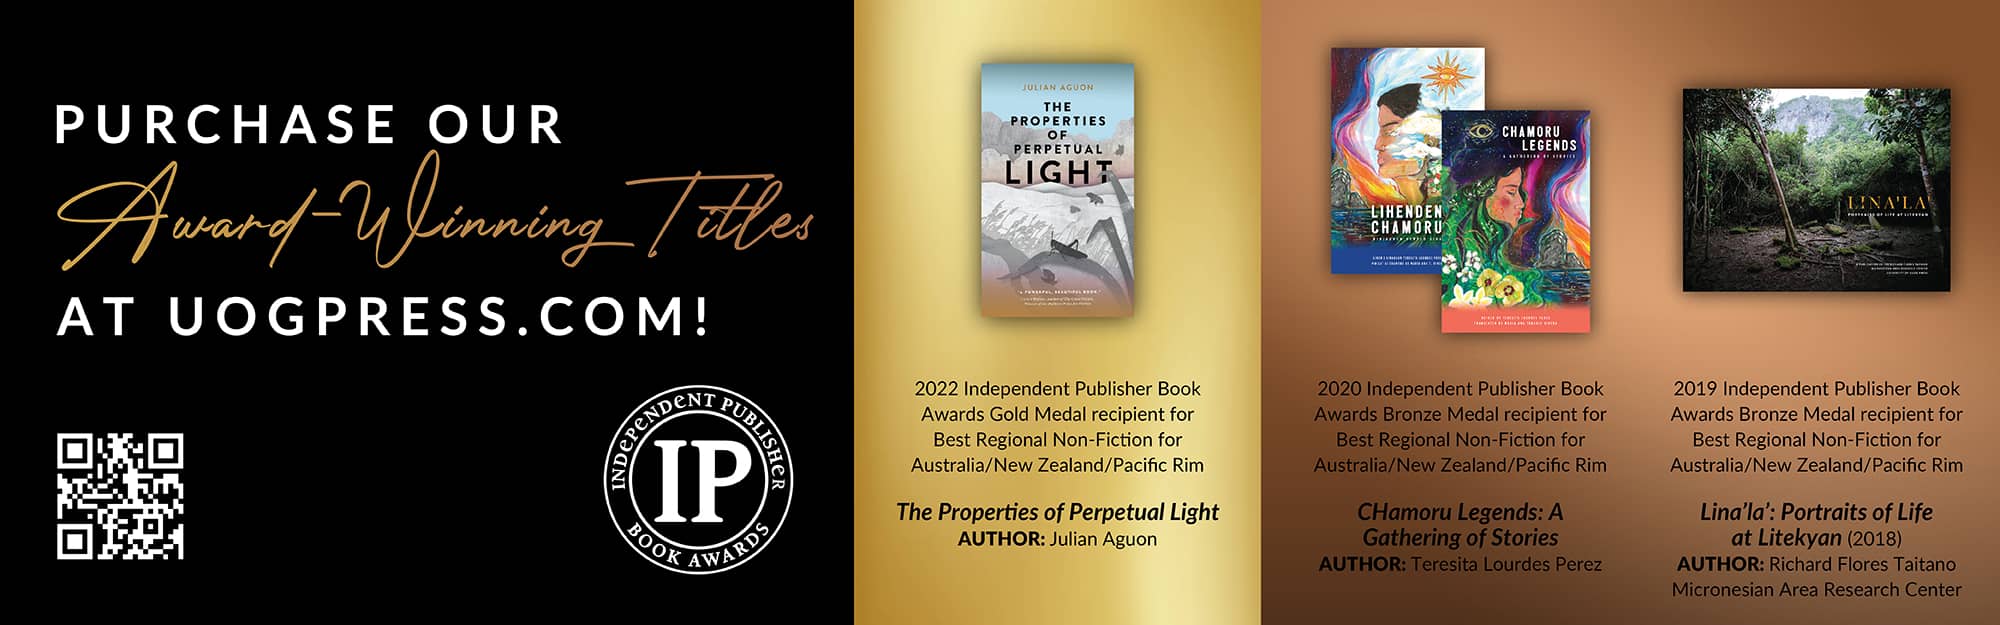 Purchase our award-winning titles at uogpress.com